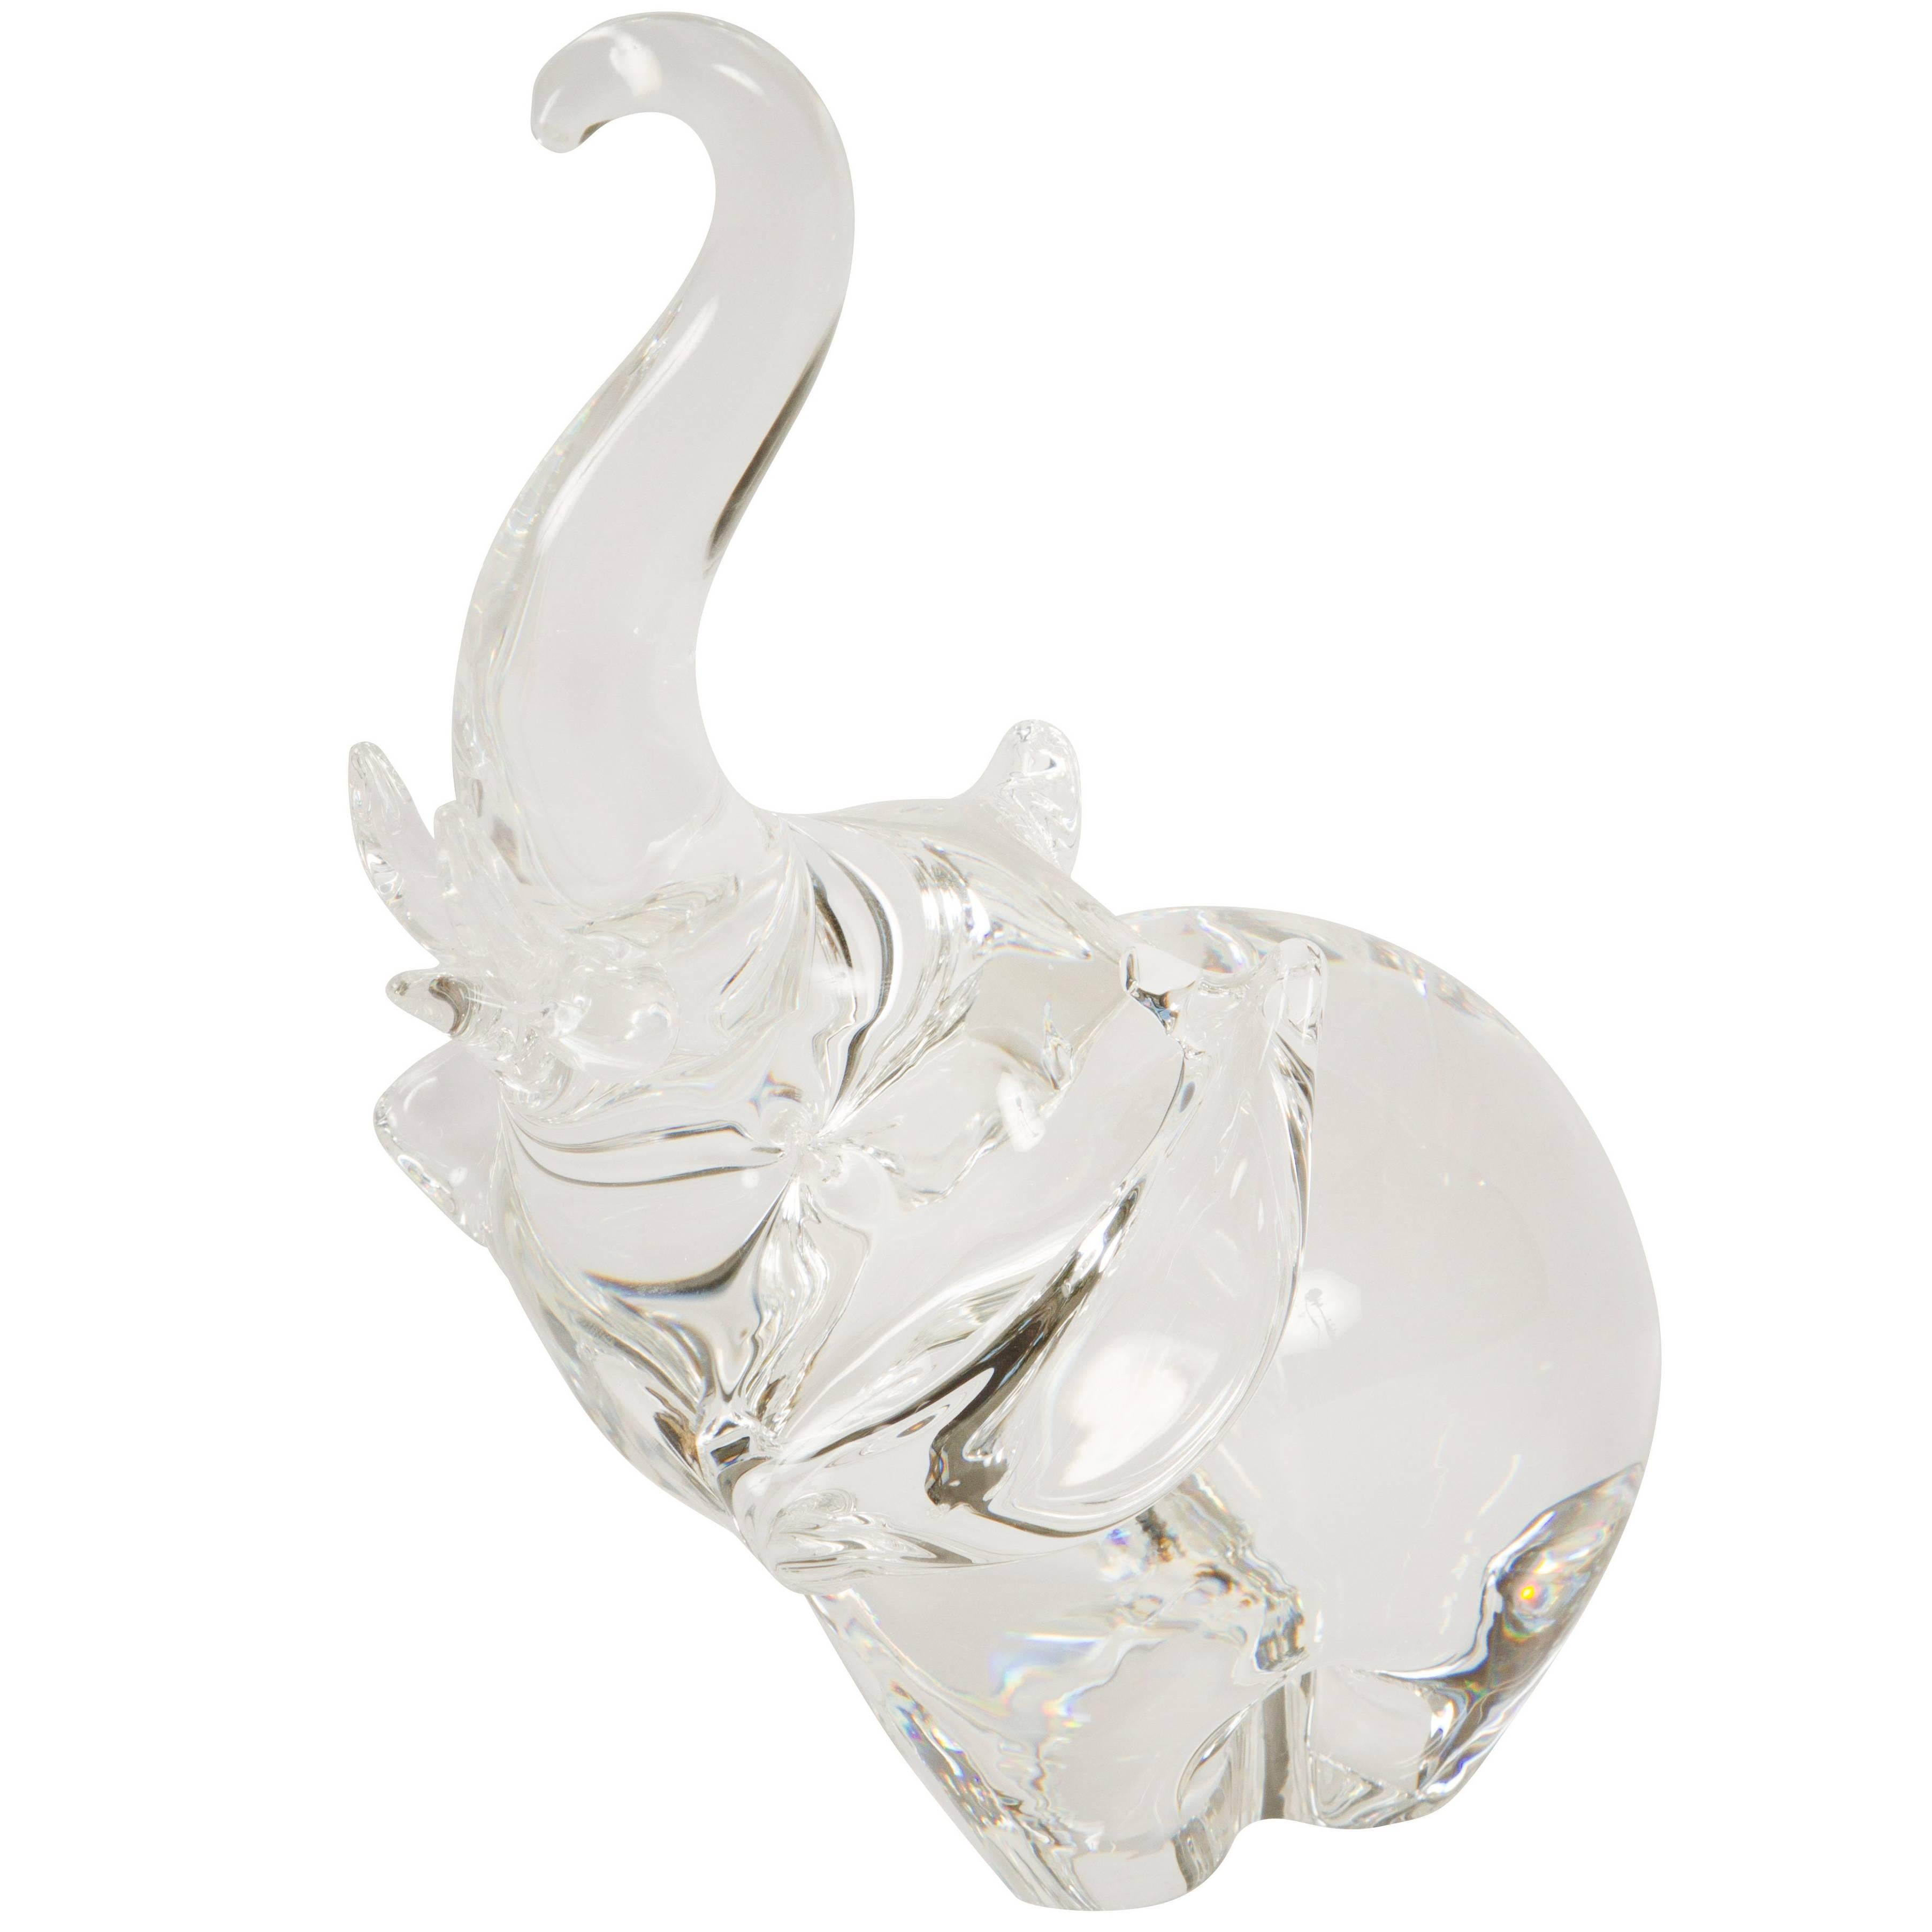 Trumpeting Elephant by James Houston for Steuben Glass